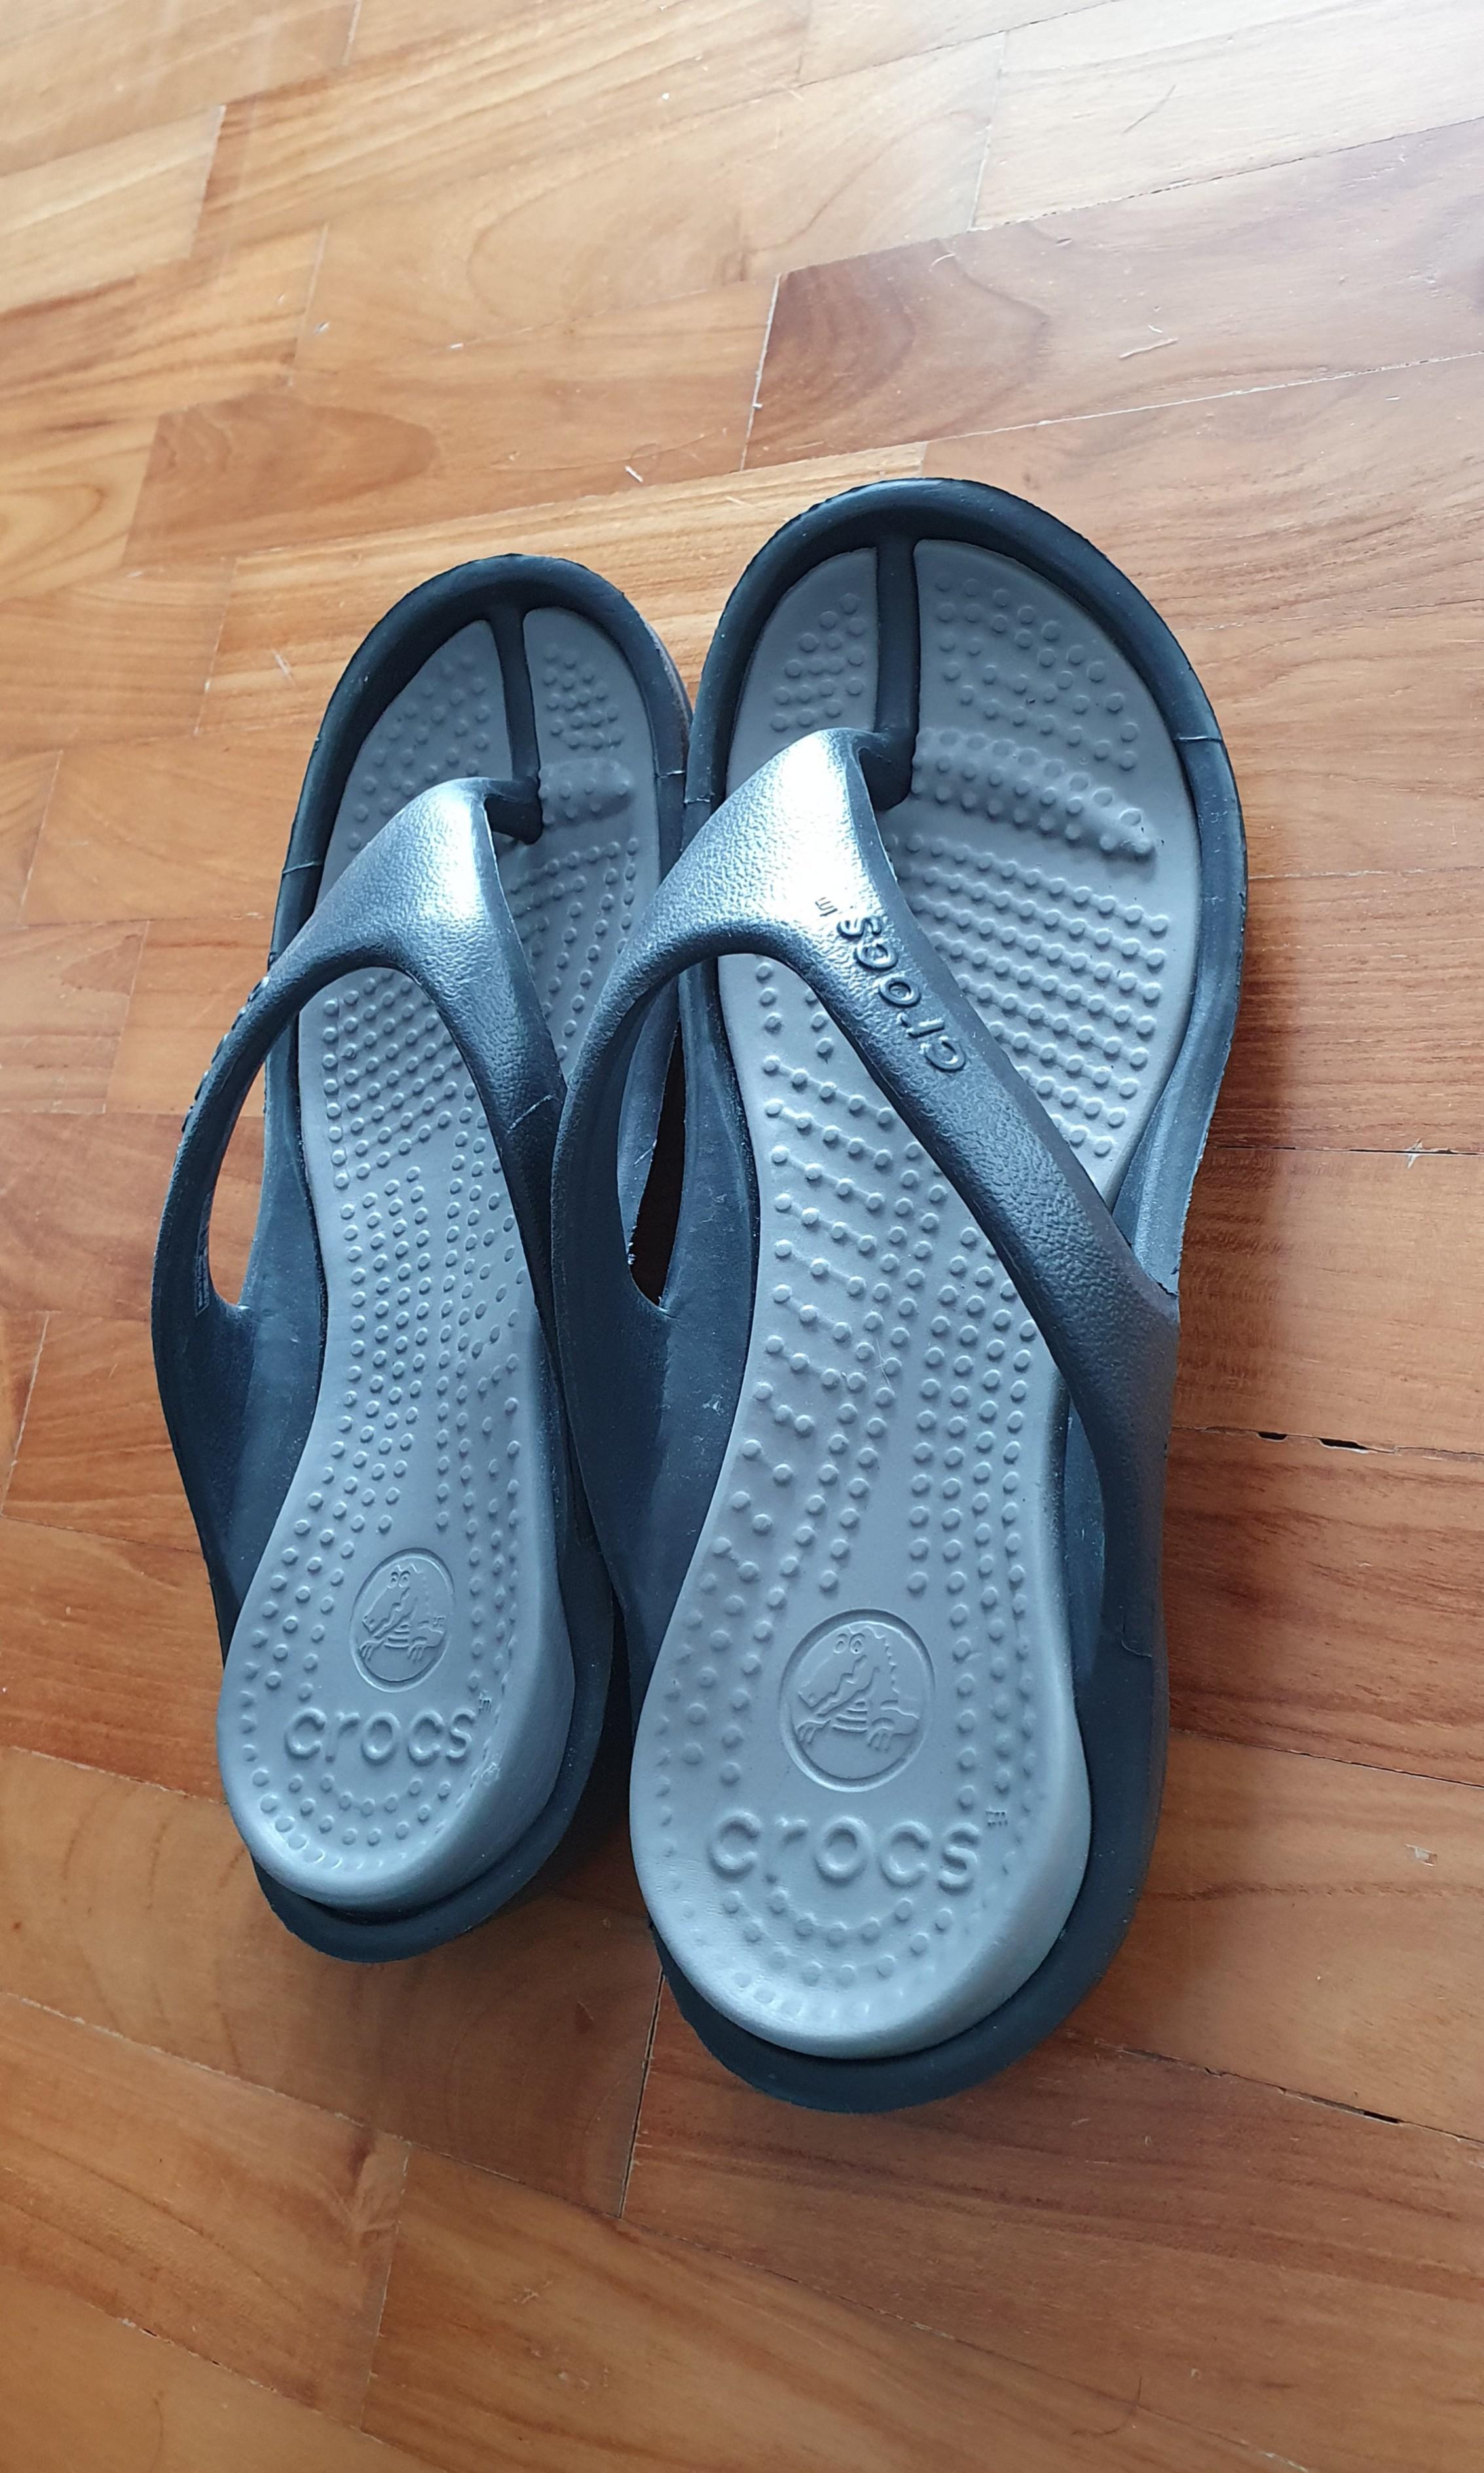 Crocs Athens II flip flops (male 8/female 10), worn only once, Men's  Fashion, Footwear, Flipflops and Slides on Carousell